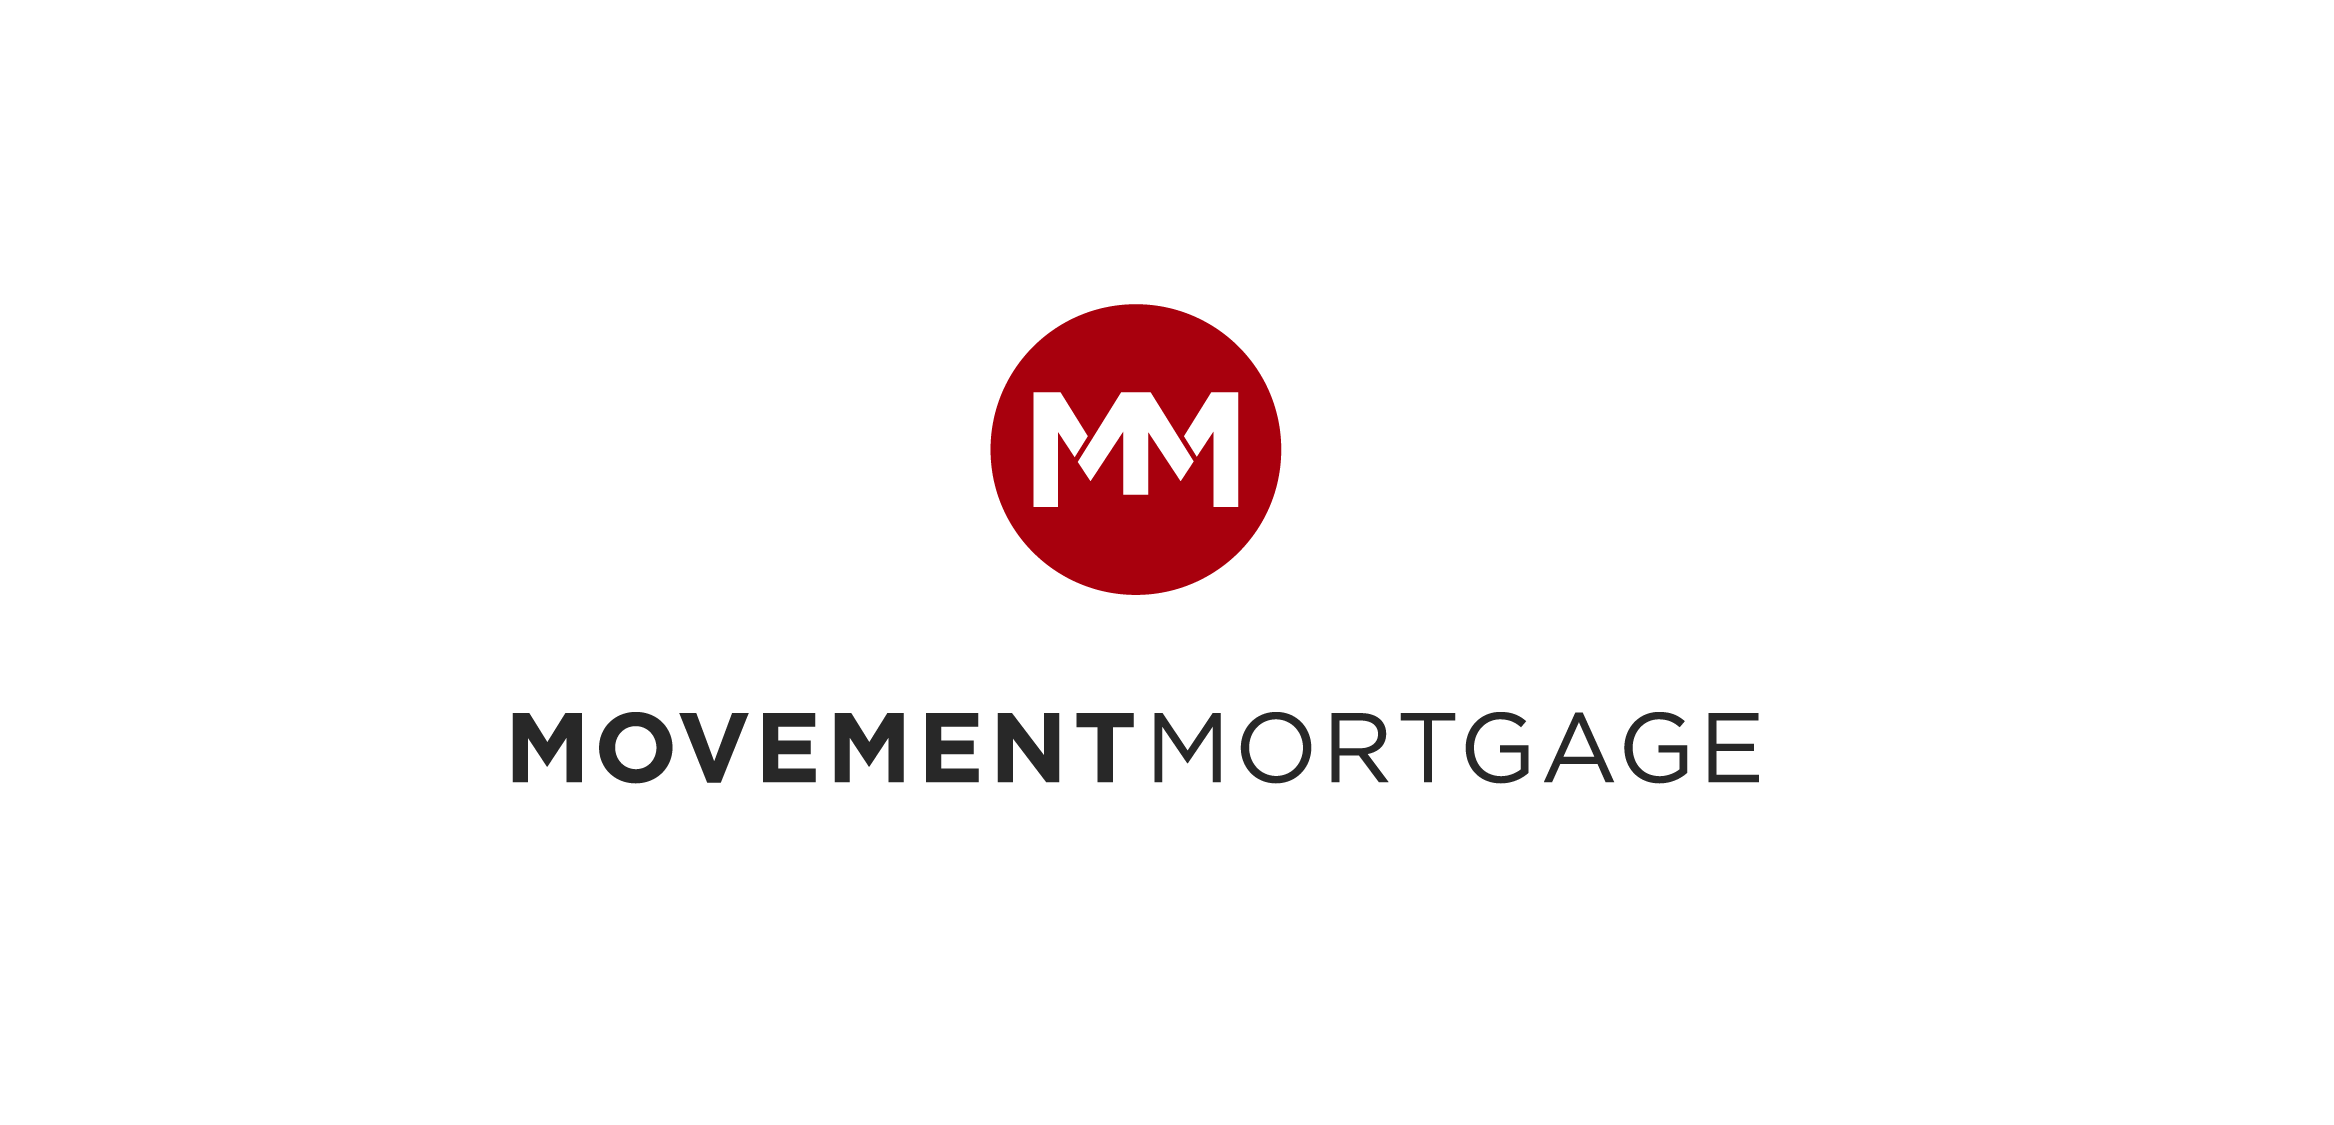 Sponsor for 5th annual Tee Off for Testicular Cancer Golf Tournament, Movement Mortgage